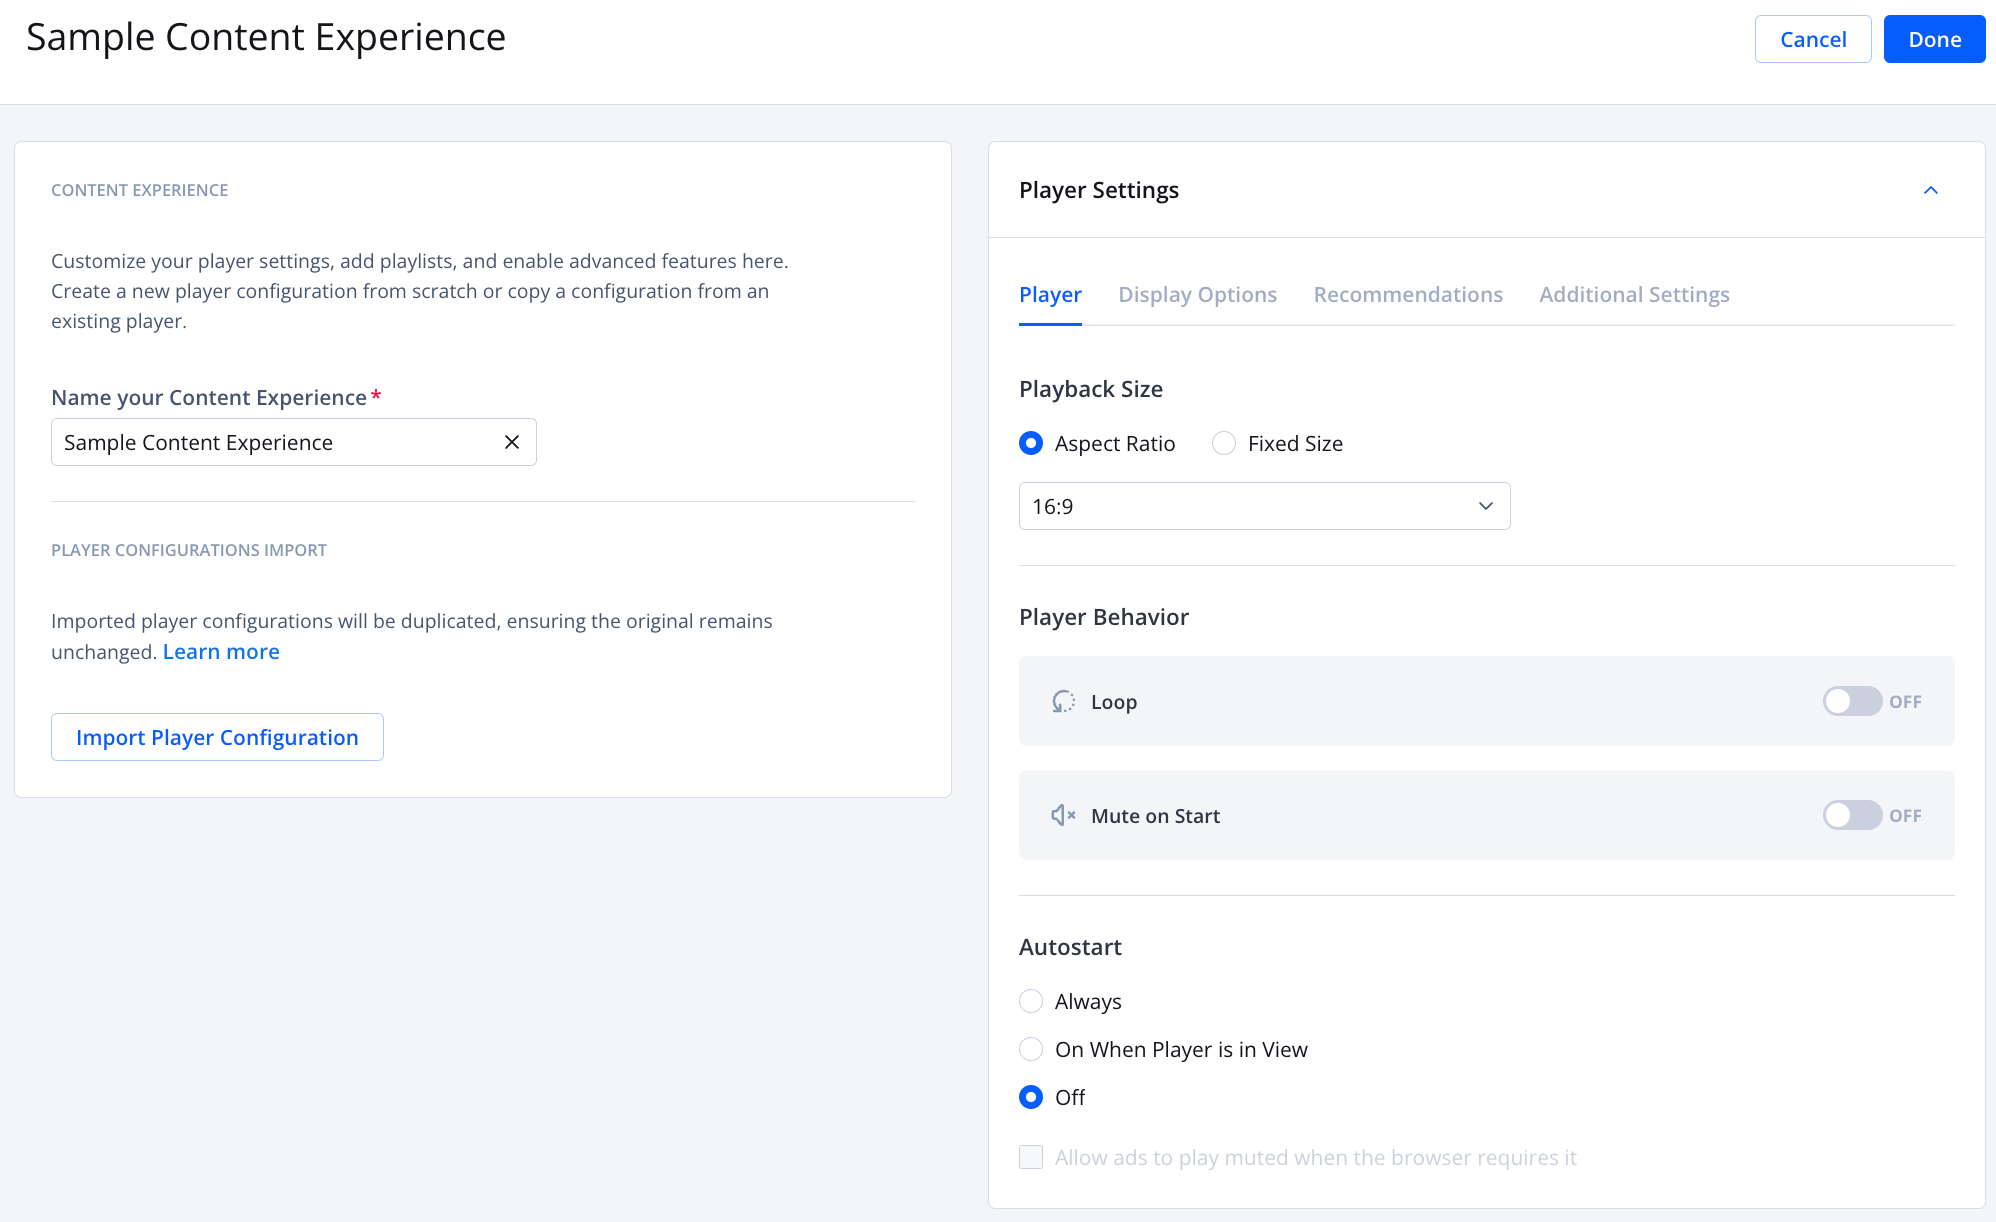 Content Experience details page